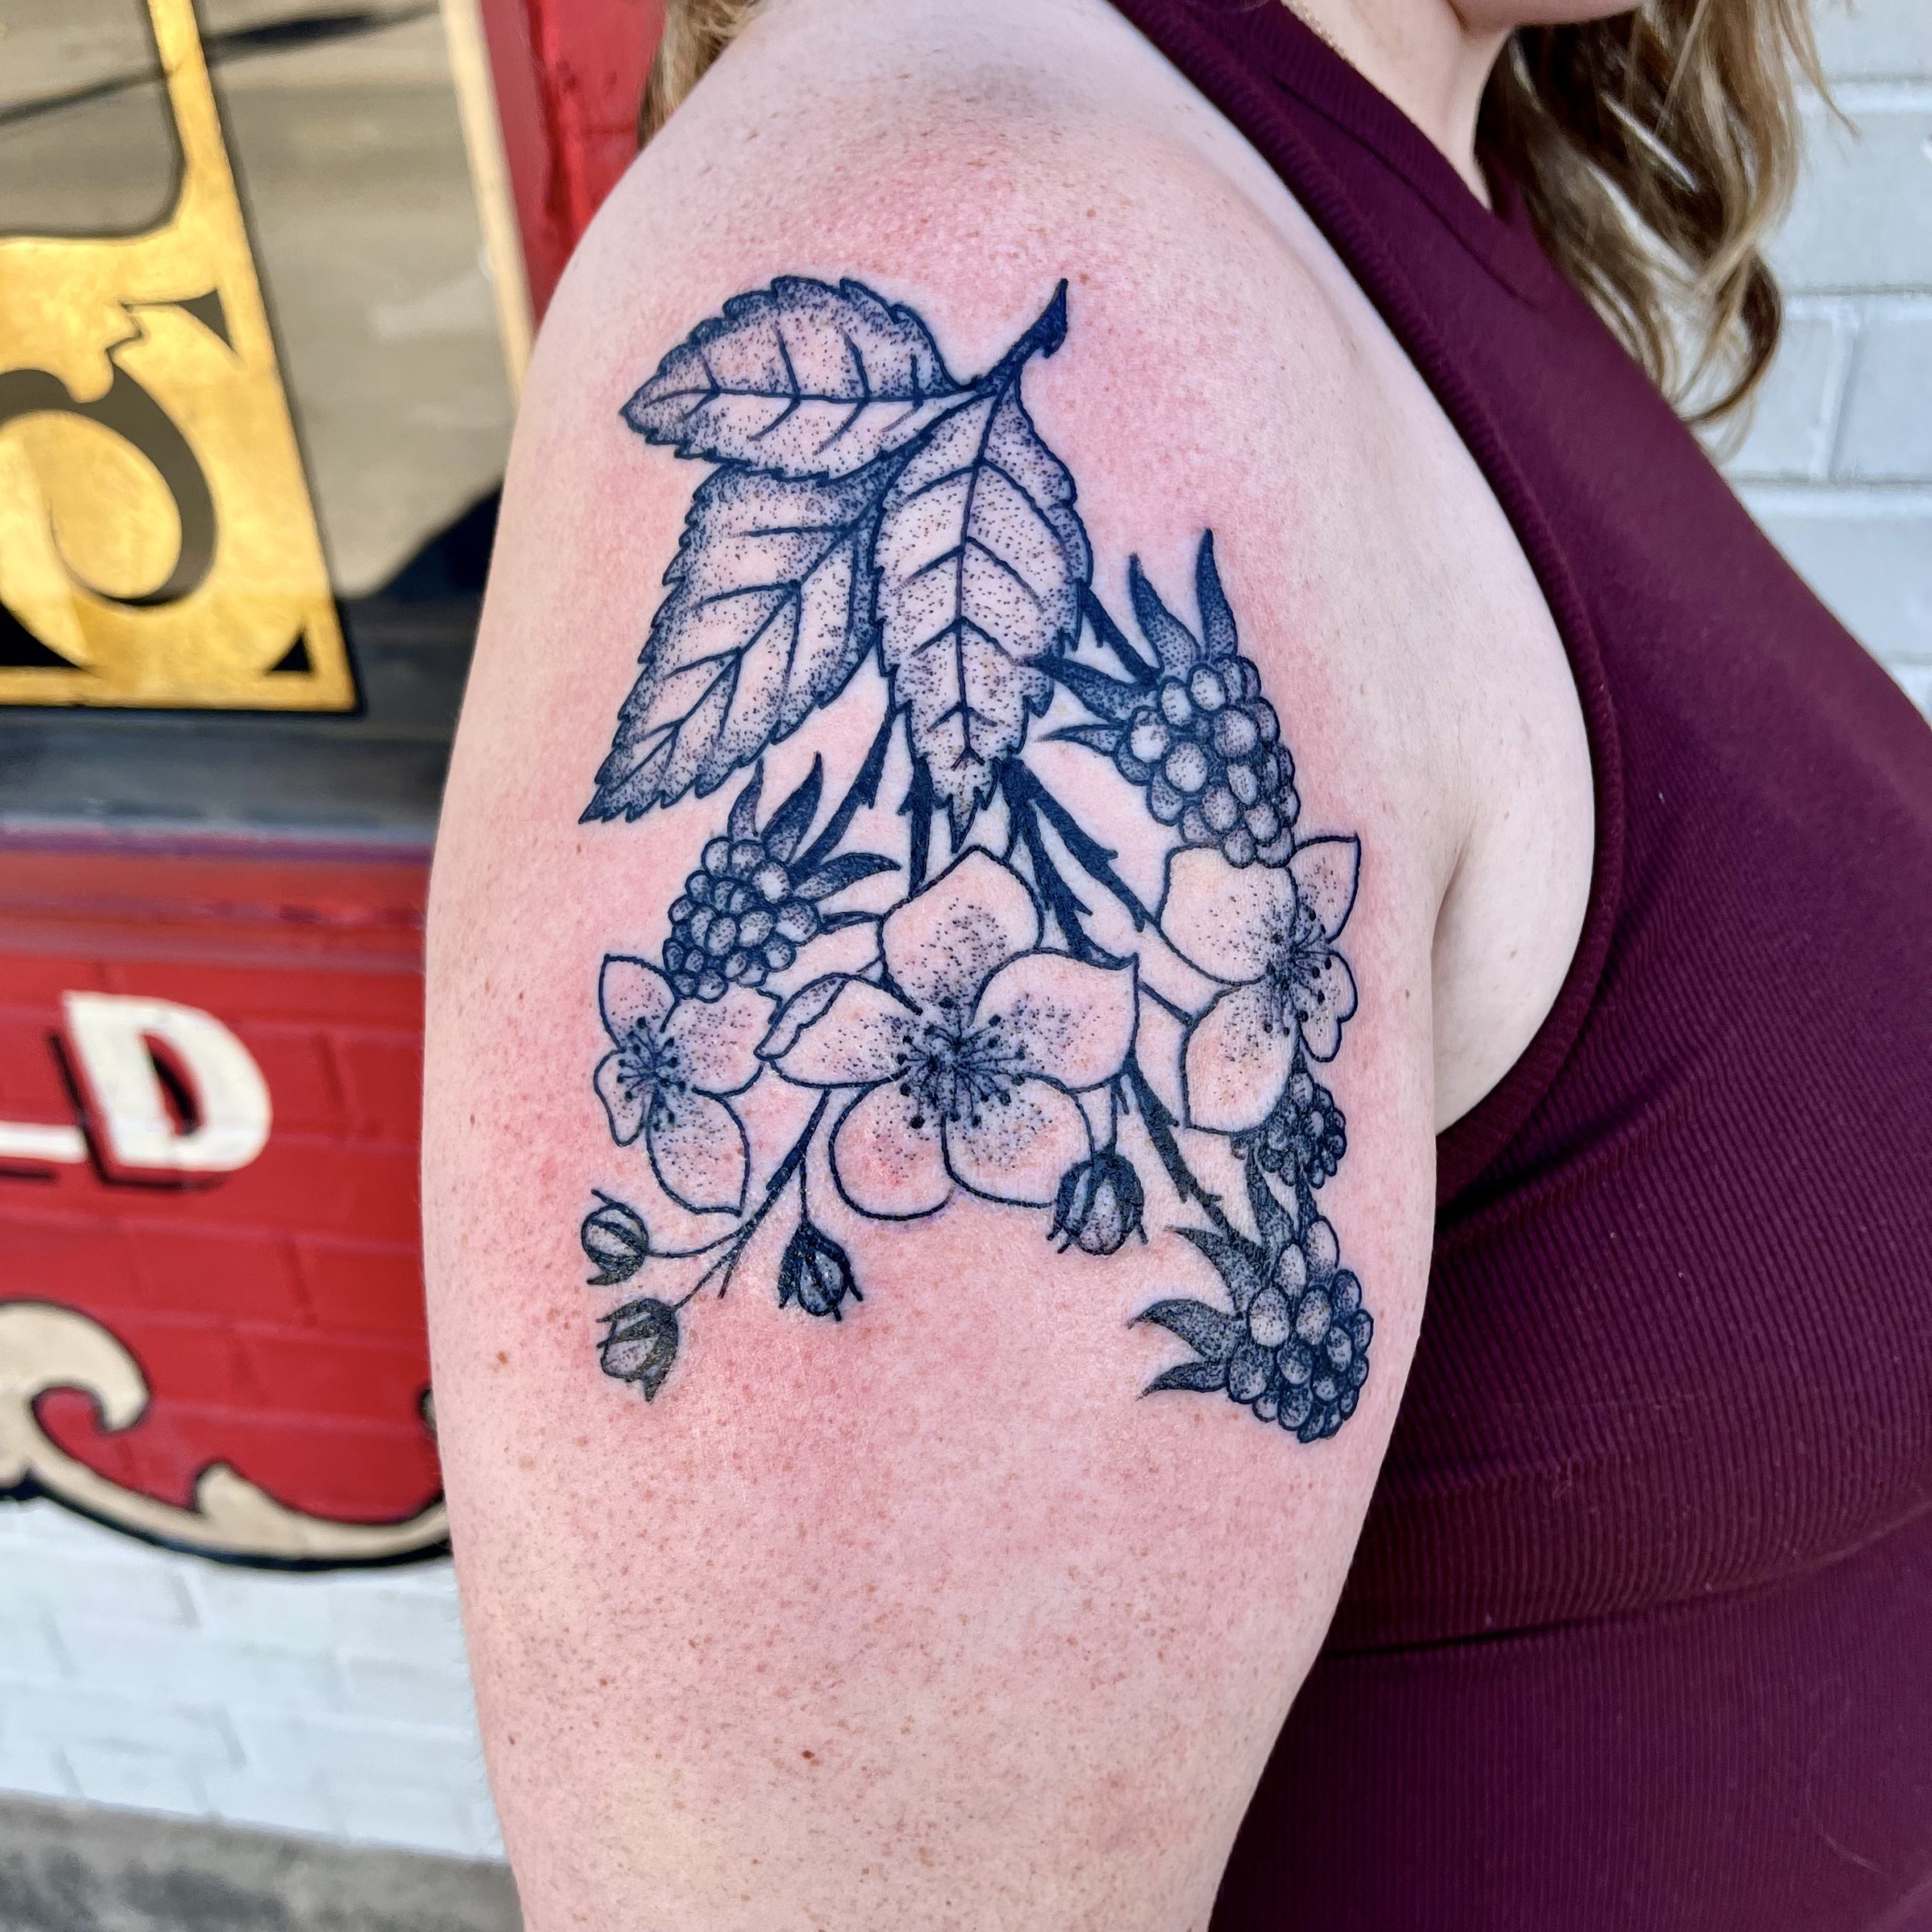 tattoo of leaves and flowers from top tattoo artist in Dallas